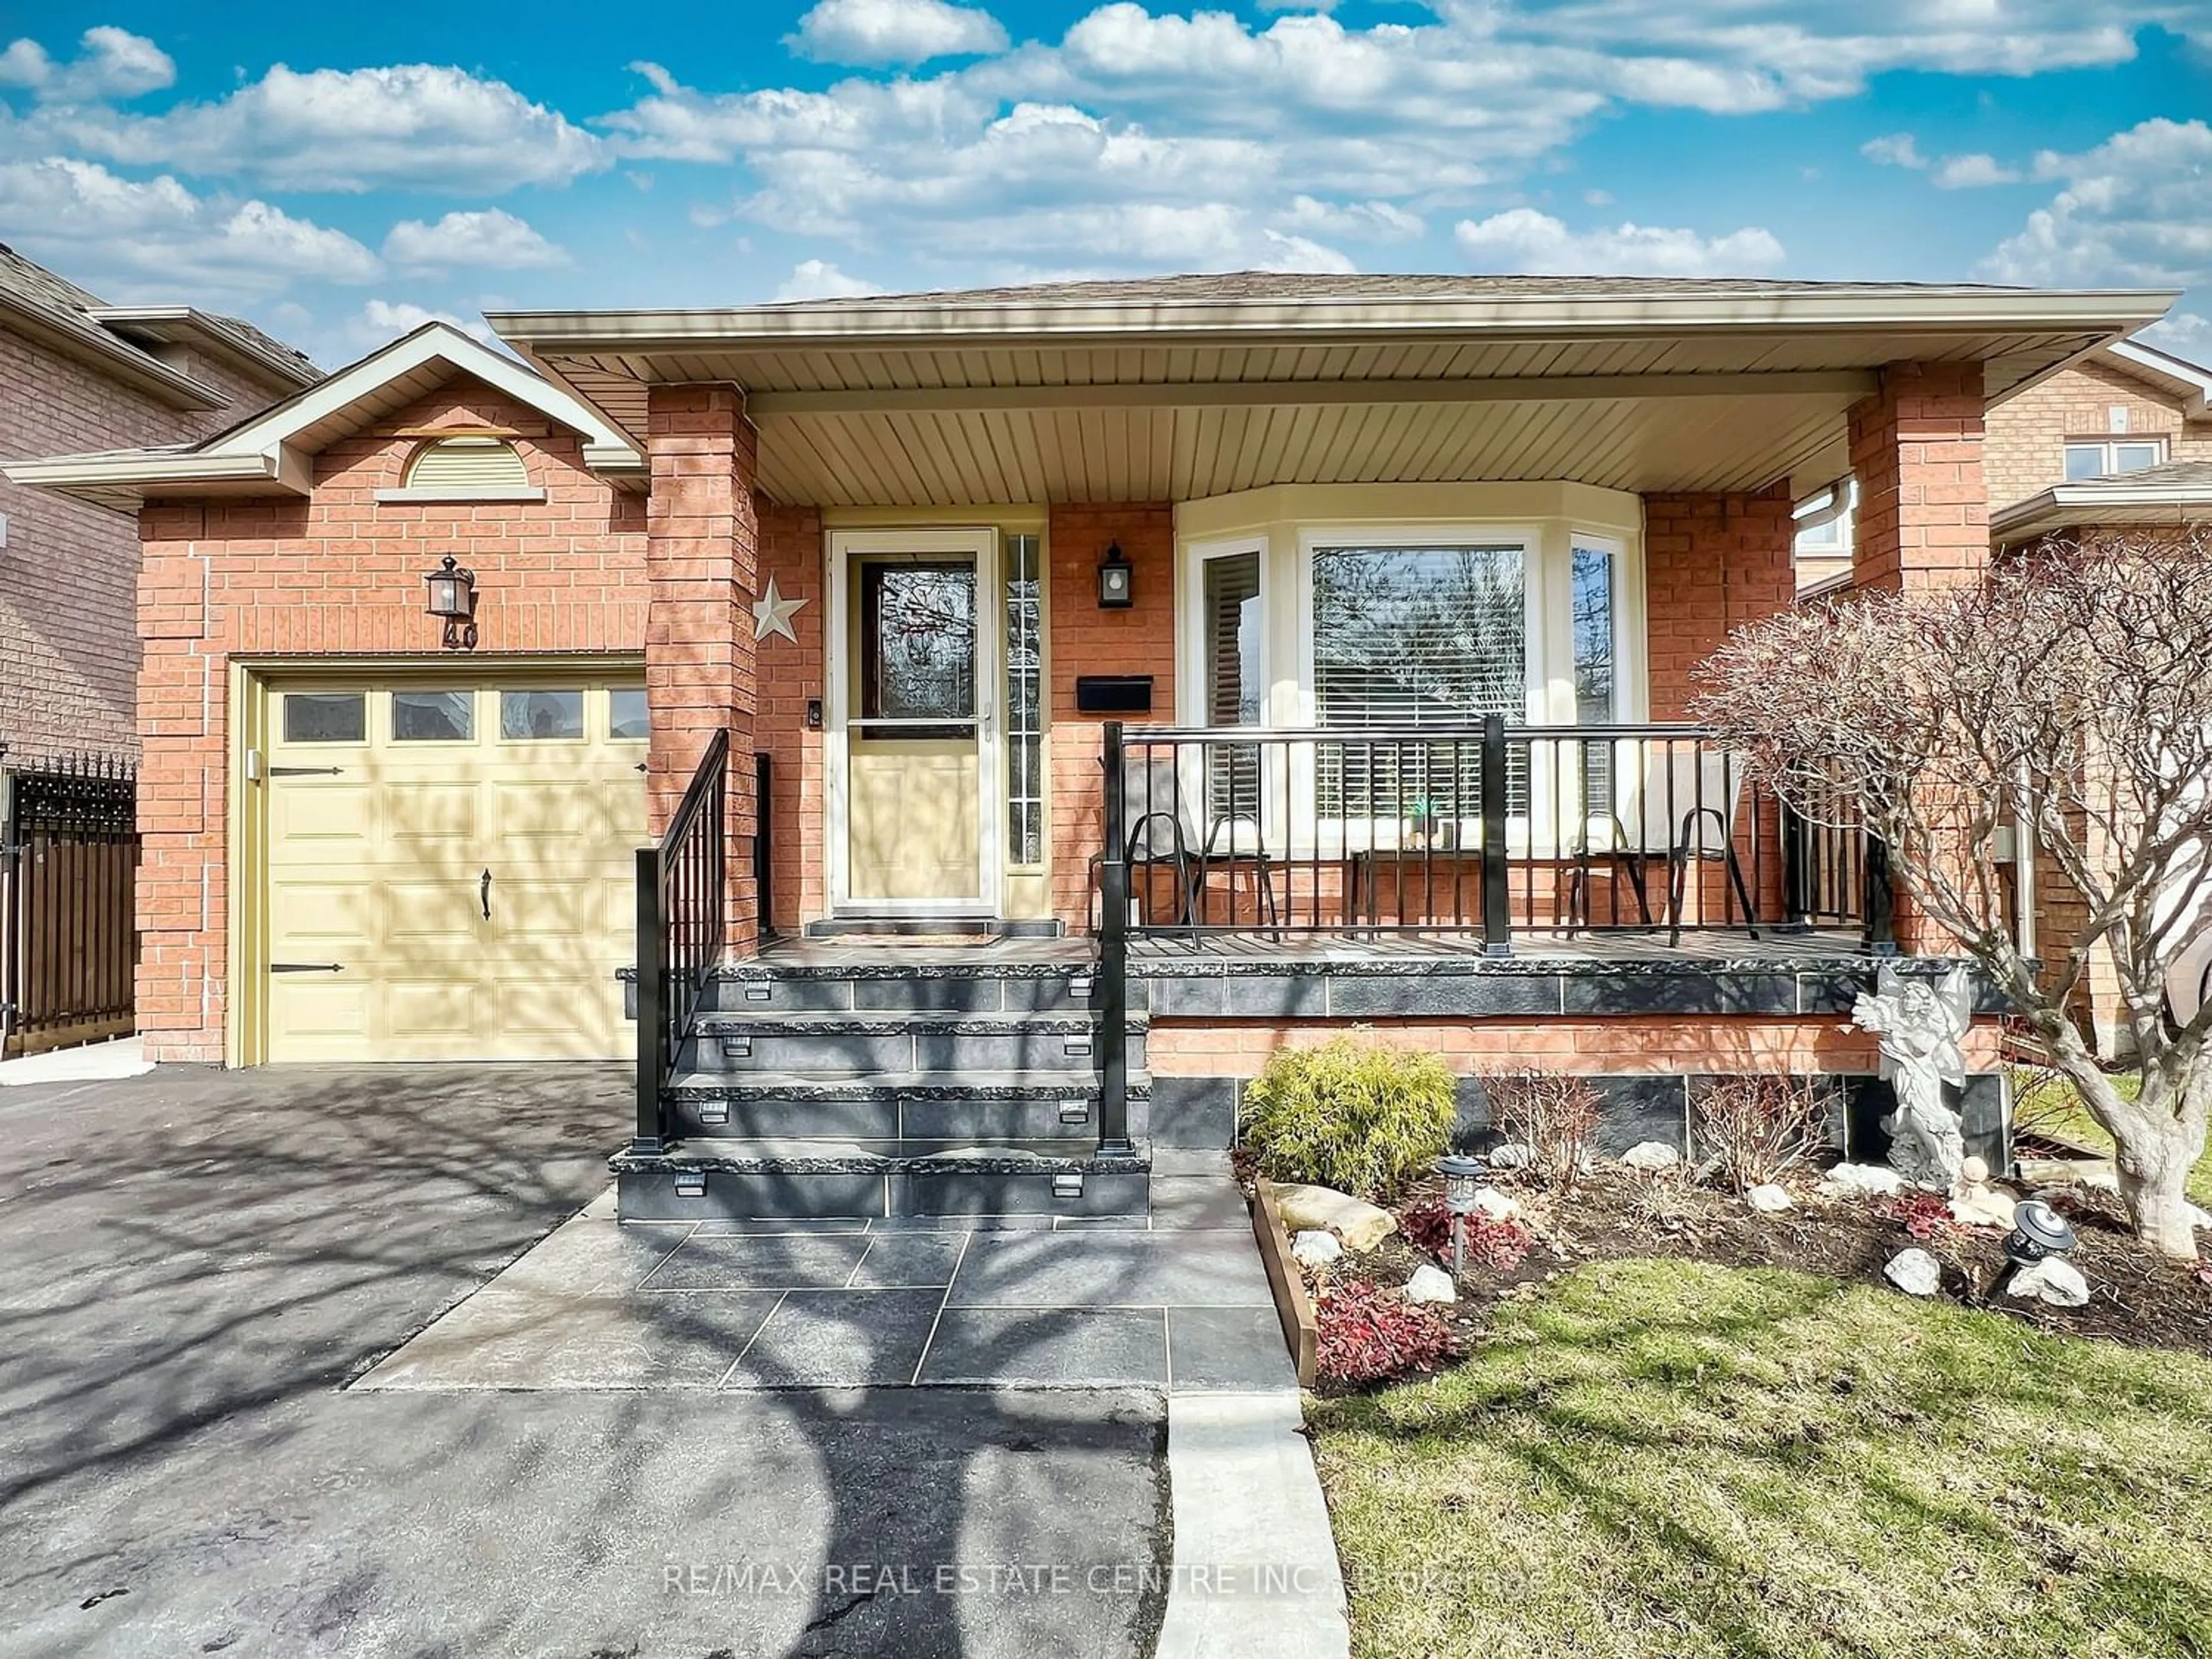 Home with brick exterior material for 40 Braemore Rd, Brampton Ontario L6X 1E5